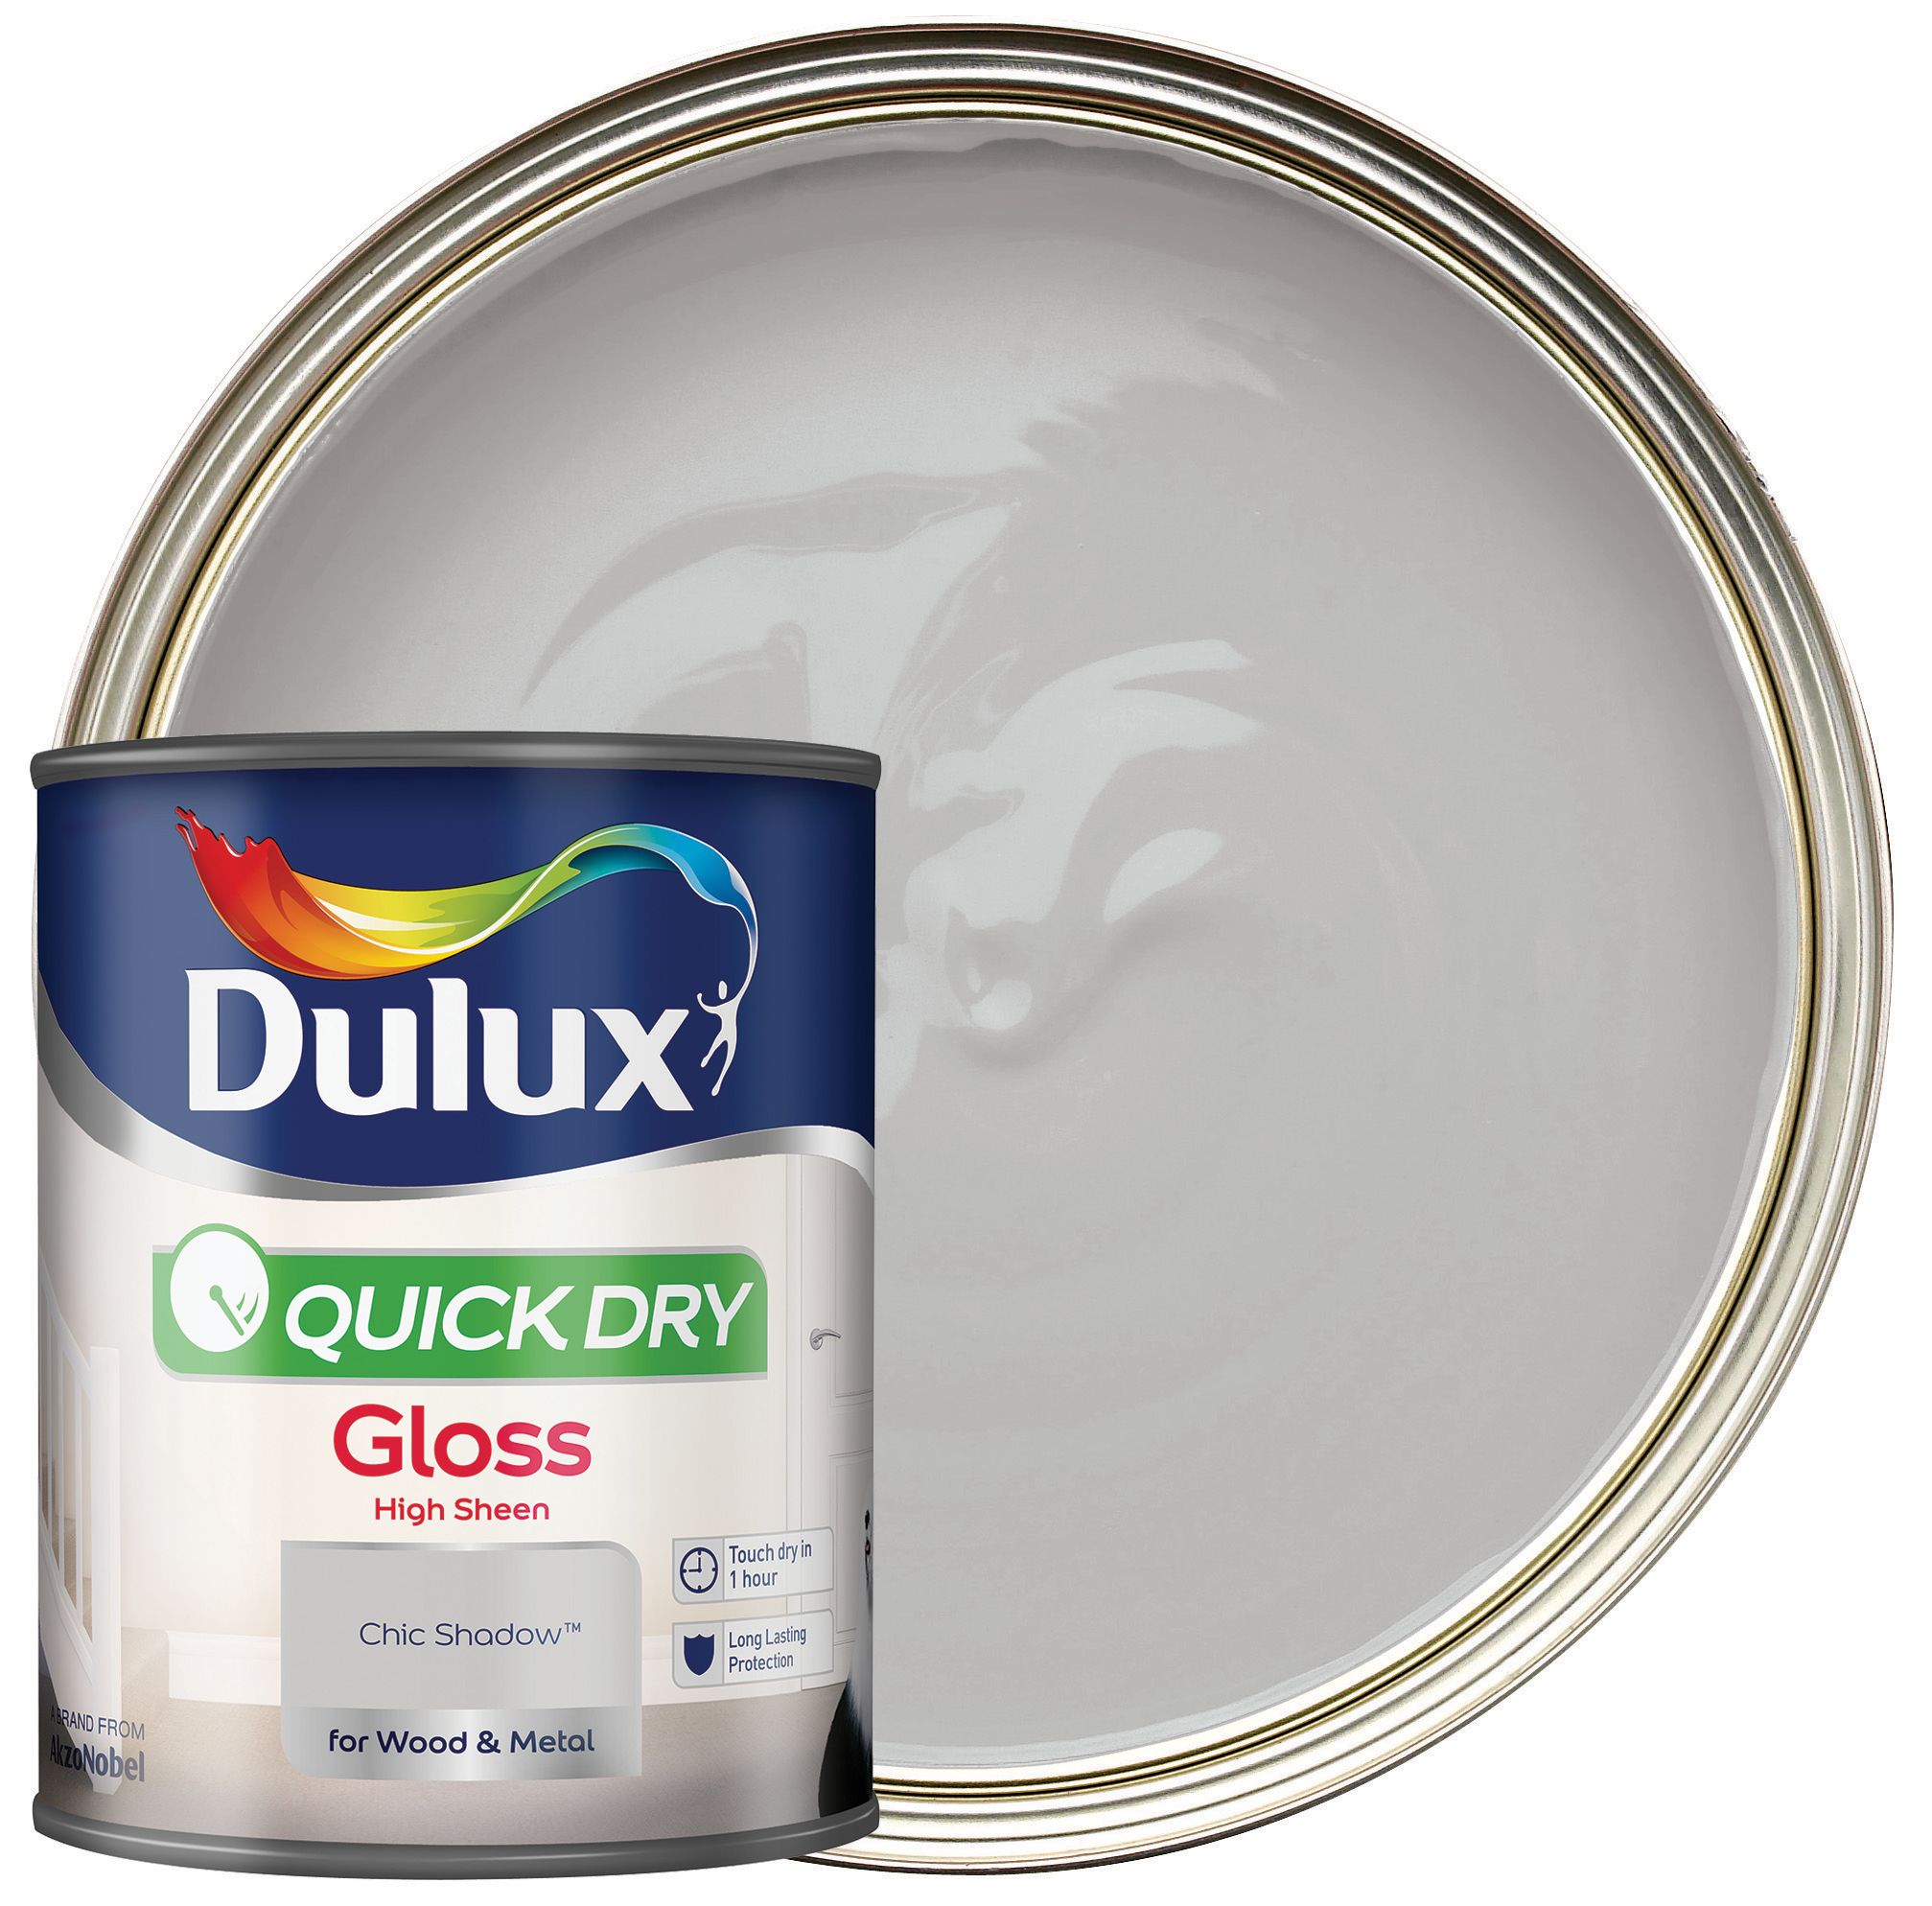 Image of Dulux Quick Dry Gloss Paint Chic Shadow - 750ml